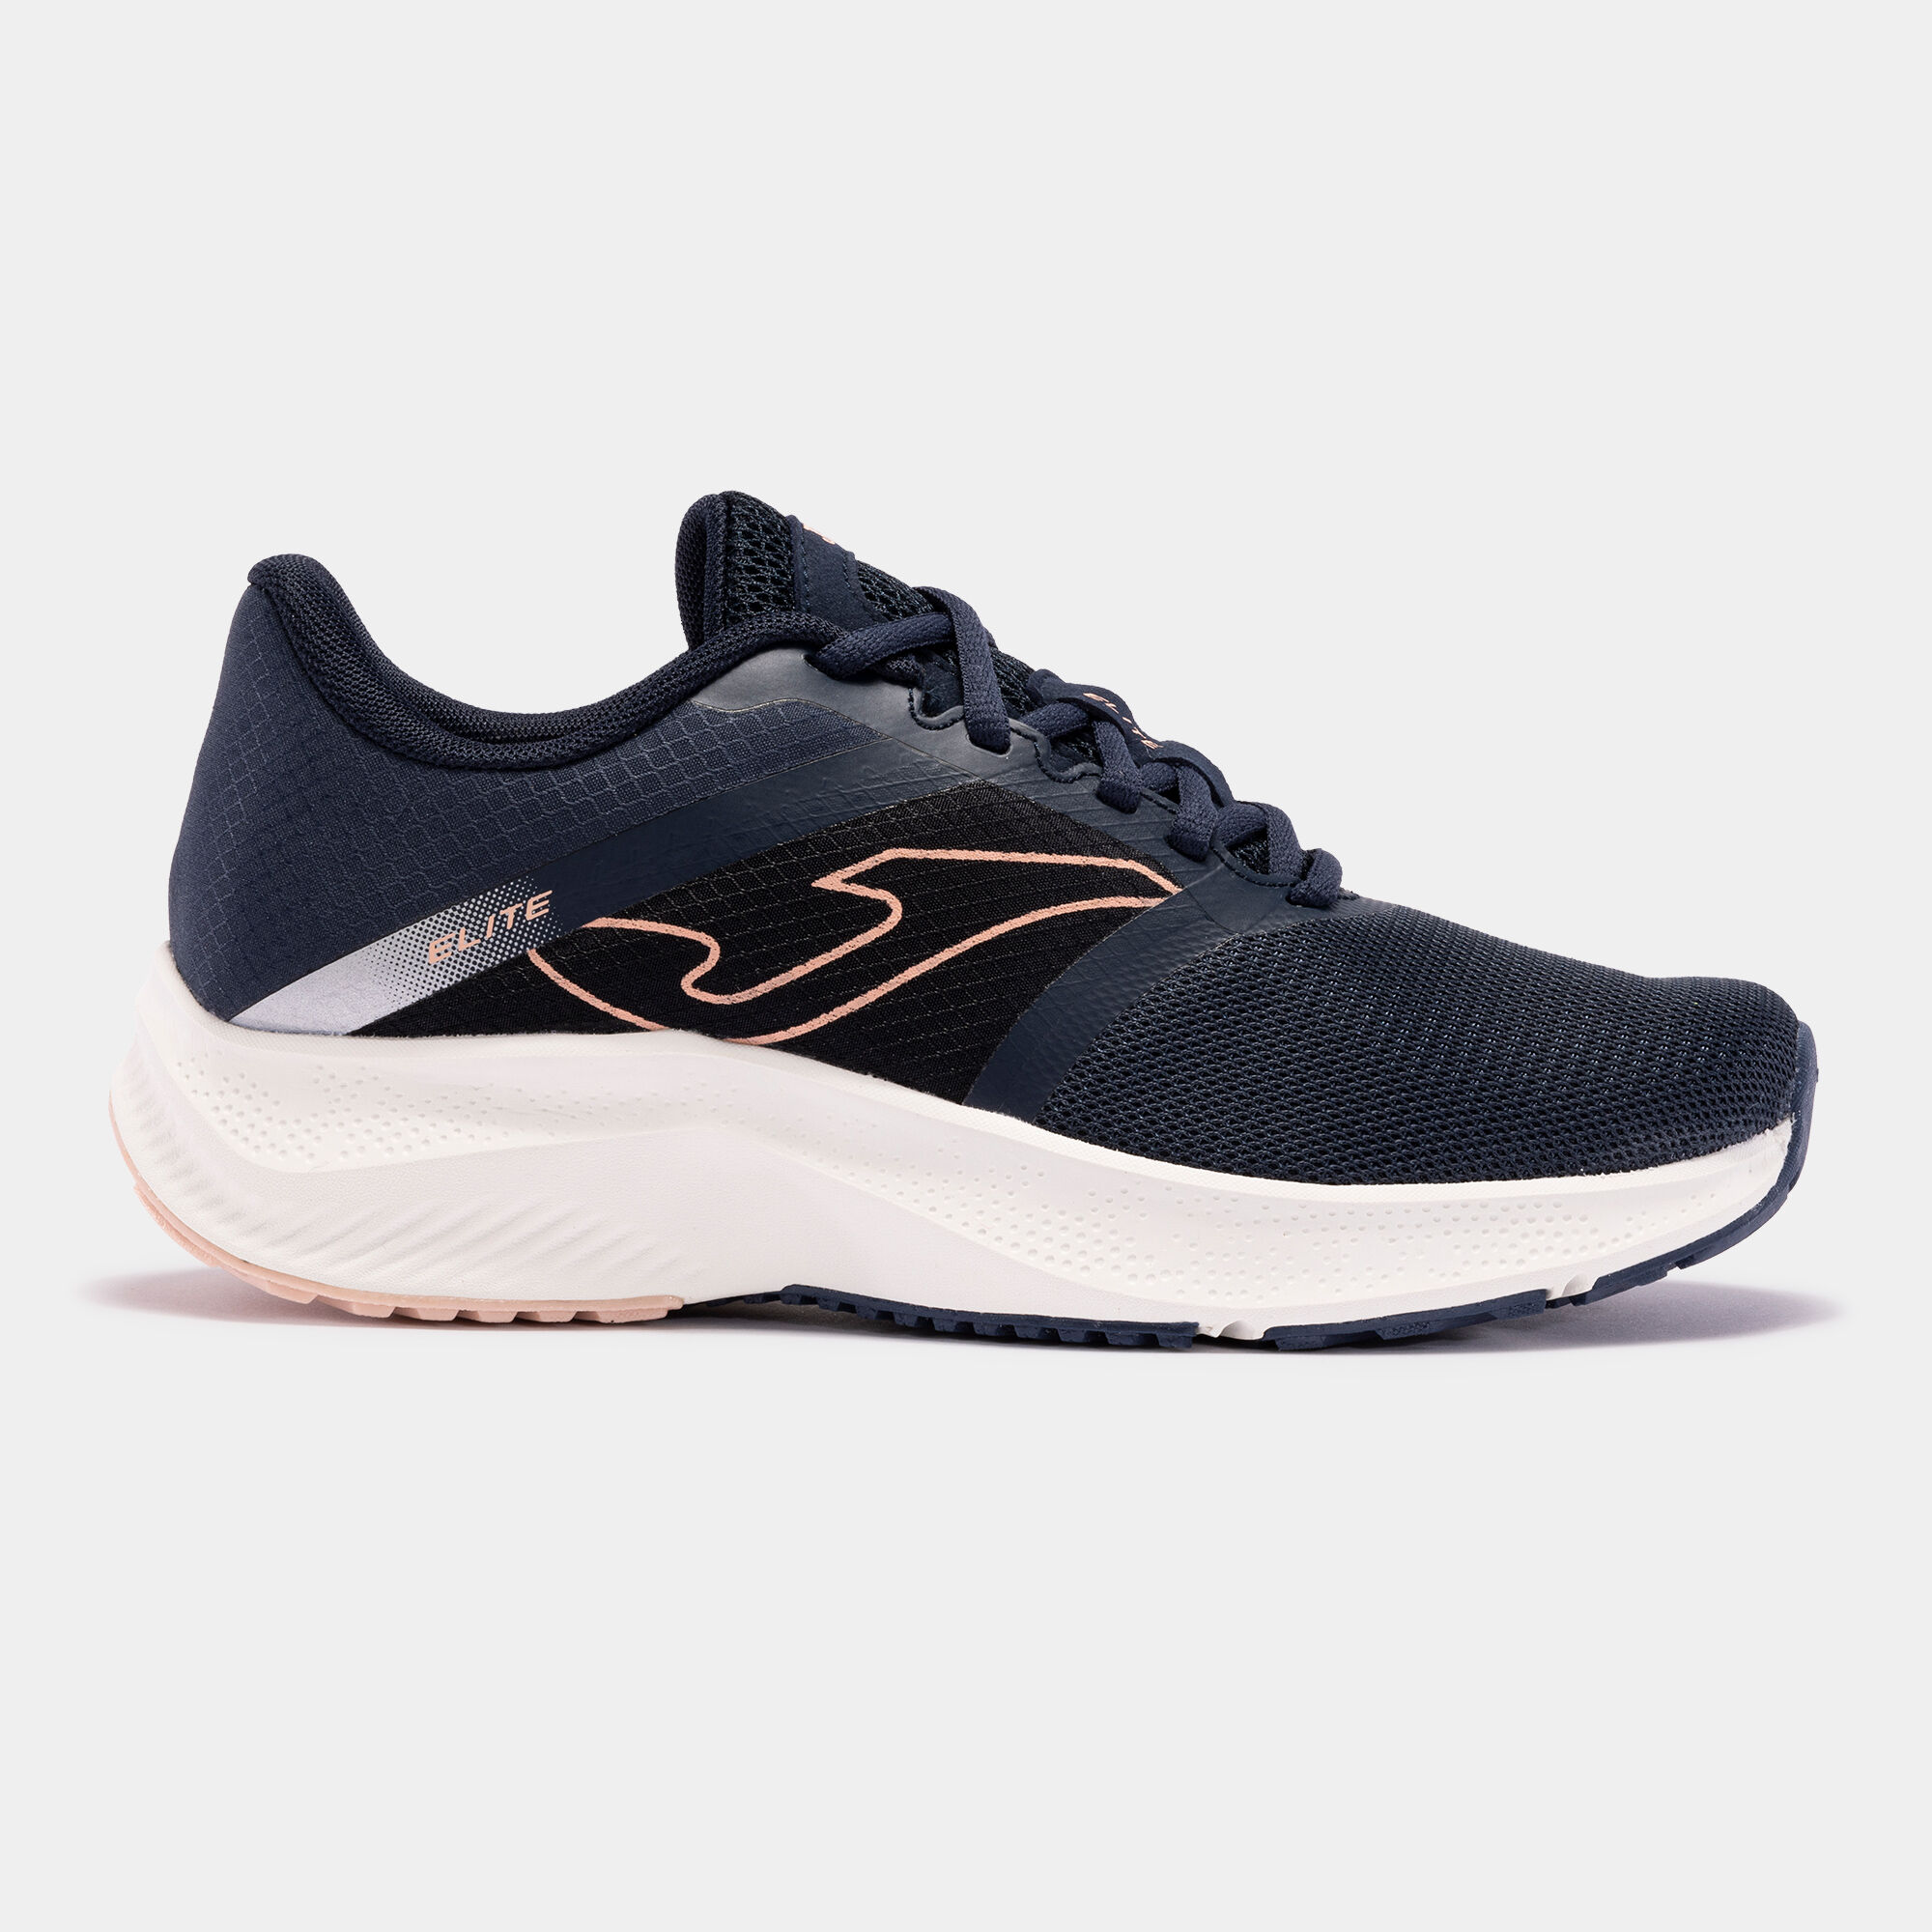 RUNNING SHOES ELITE 22 WOMAN NAVY BLUE